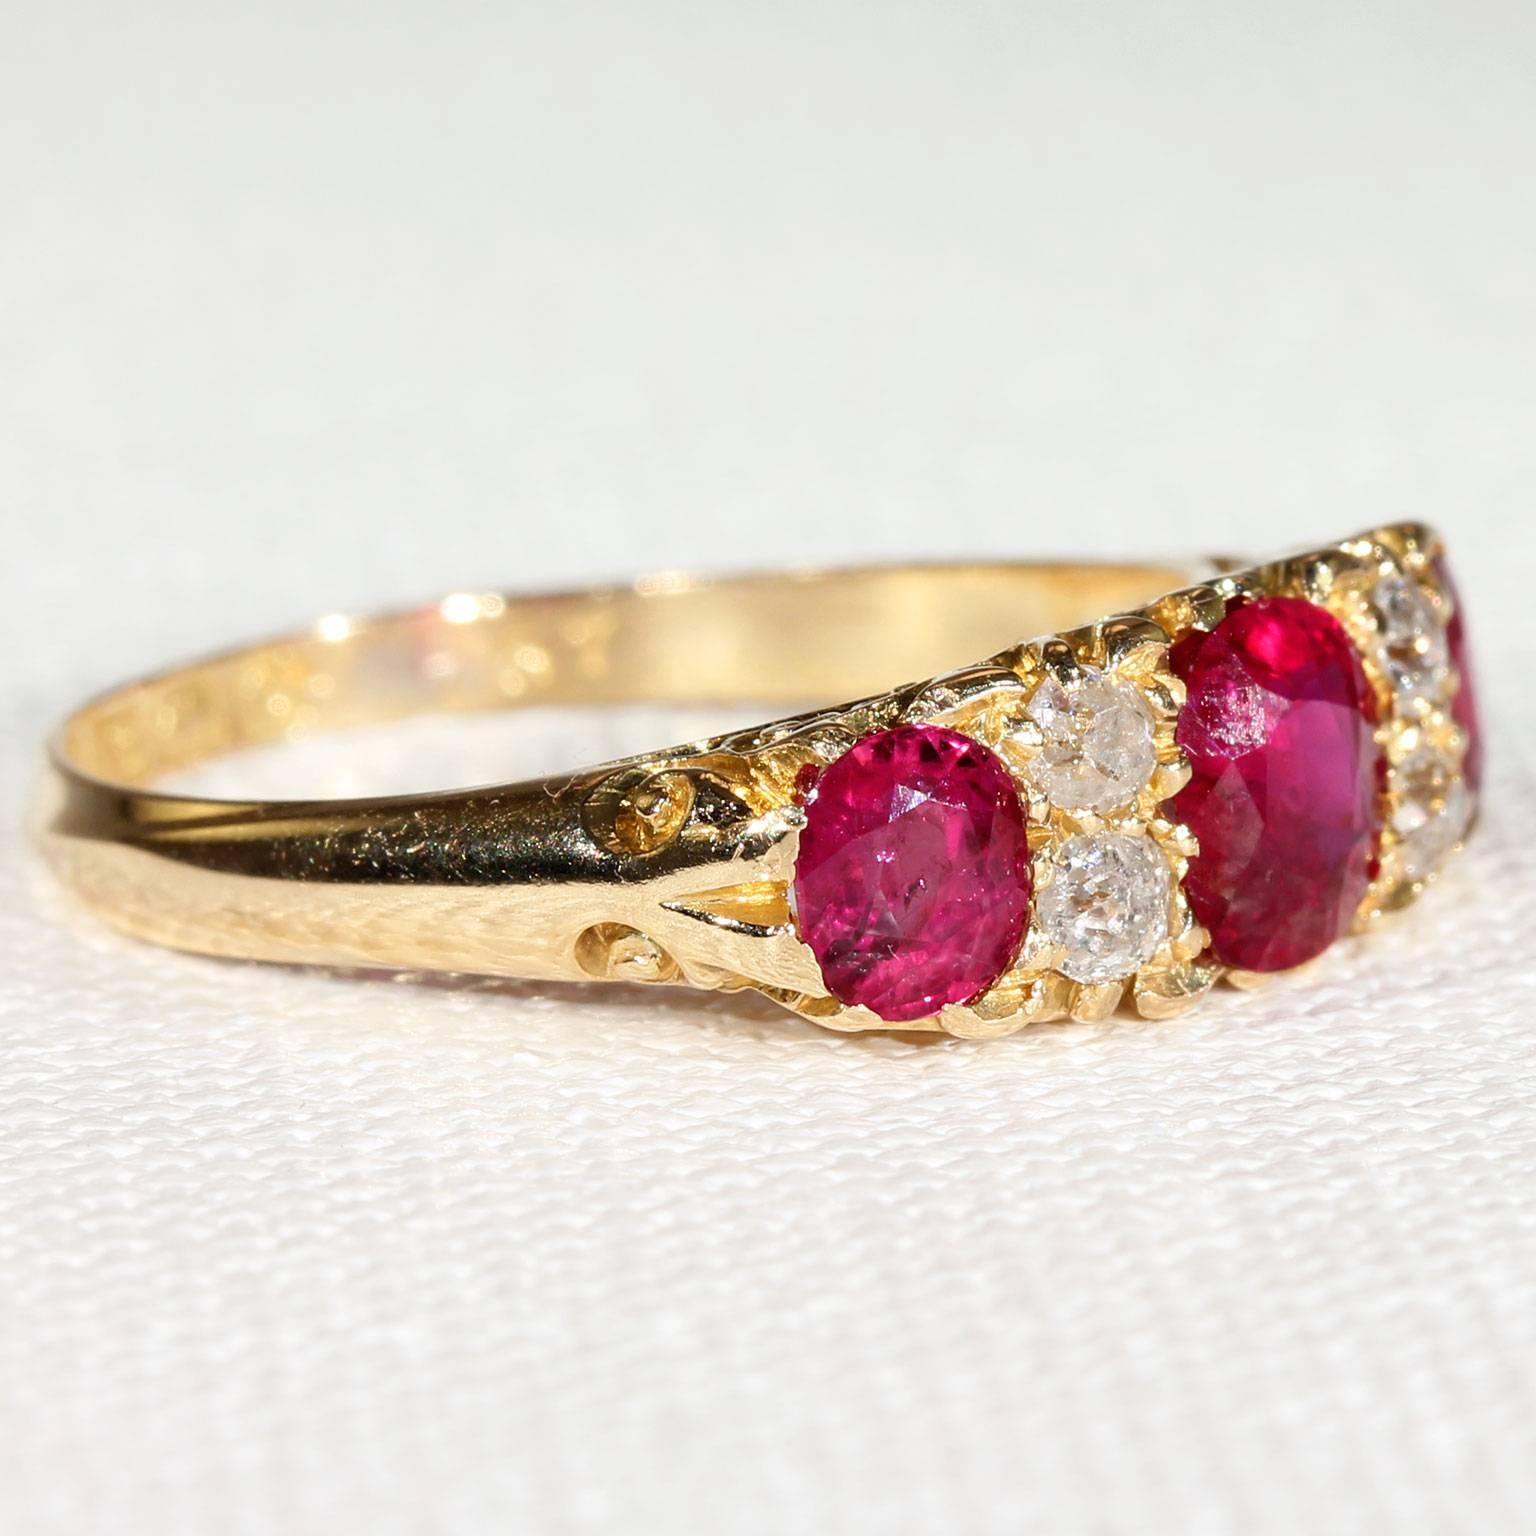 Three pidgeon blood red rubies are the stars of this goreous Edwardian ring. This English rose is set with three untreated Burmese rubies, the center stone measures 5.8 x 5.2 x 3.5 mm and weighs approximately .8 carats, the other two rubies measure